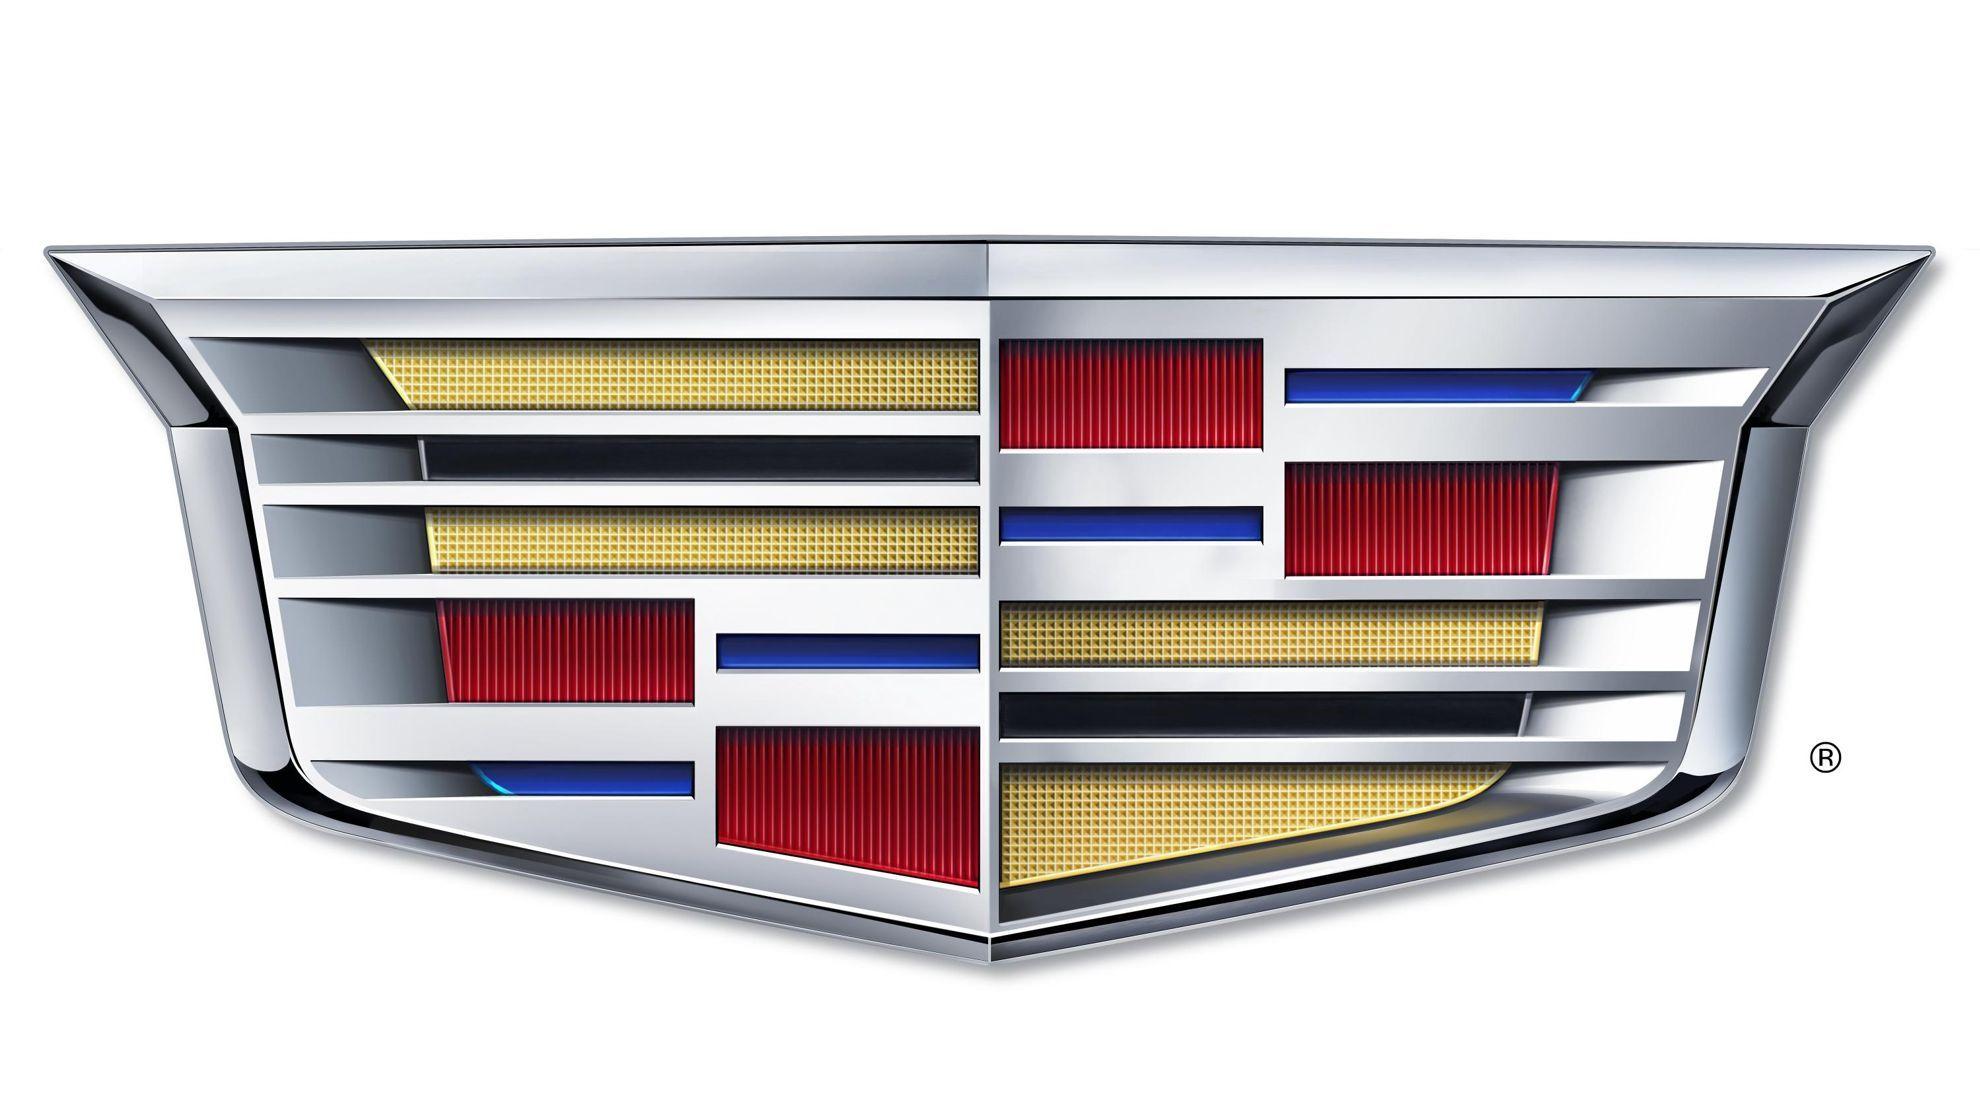 Cadillac Logo - Cadillac Logo, Cadillac Car Symbol Meaning and History. Car Brand